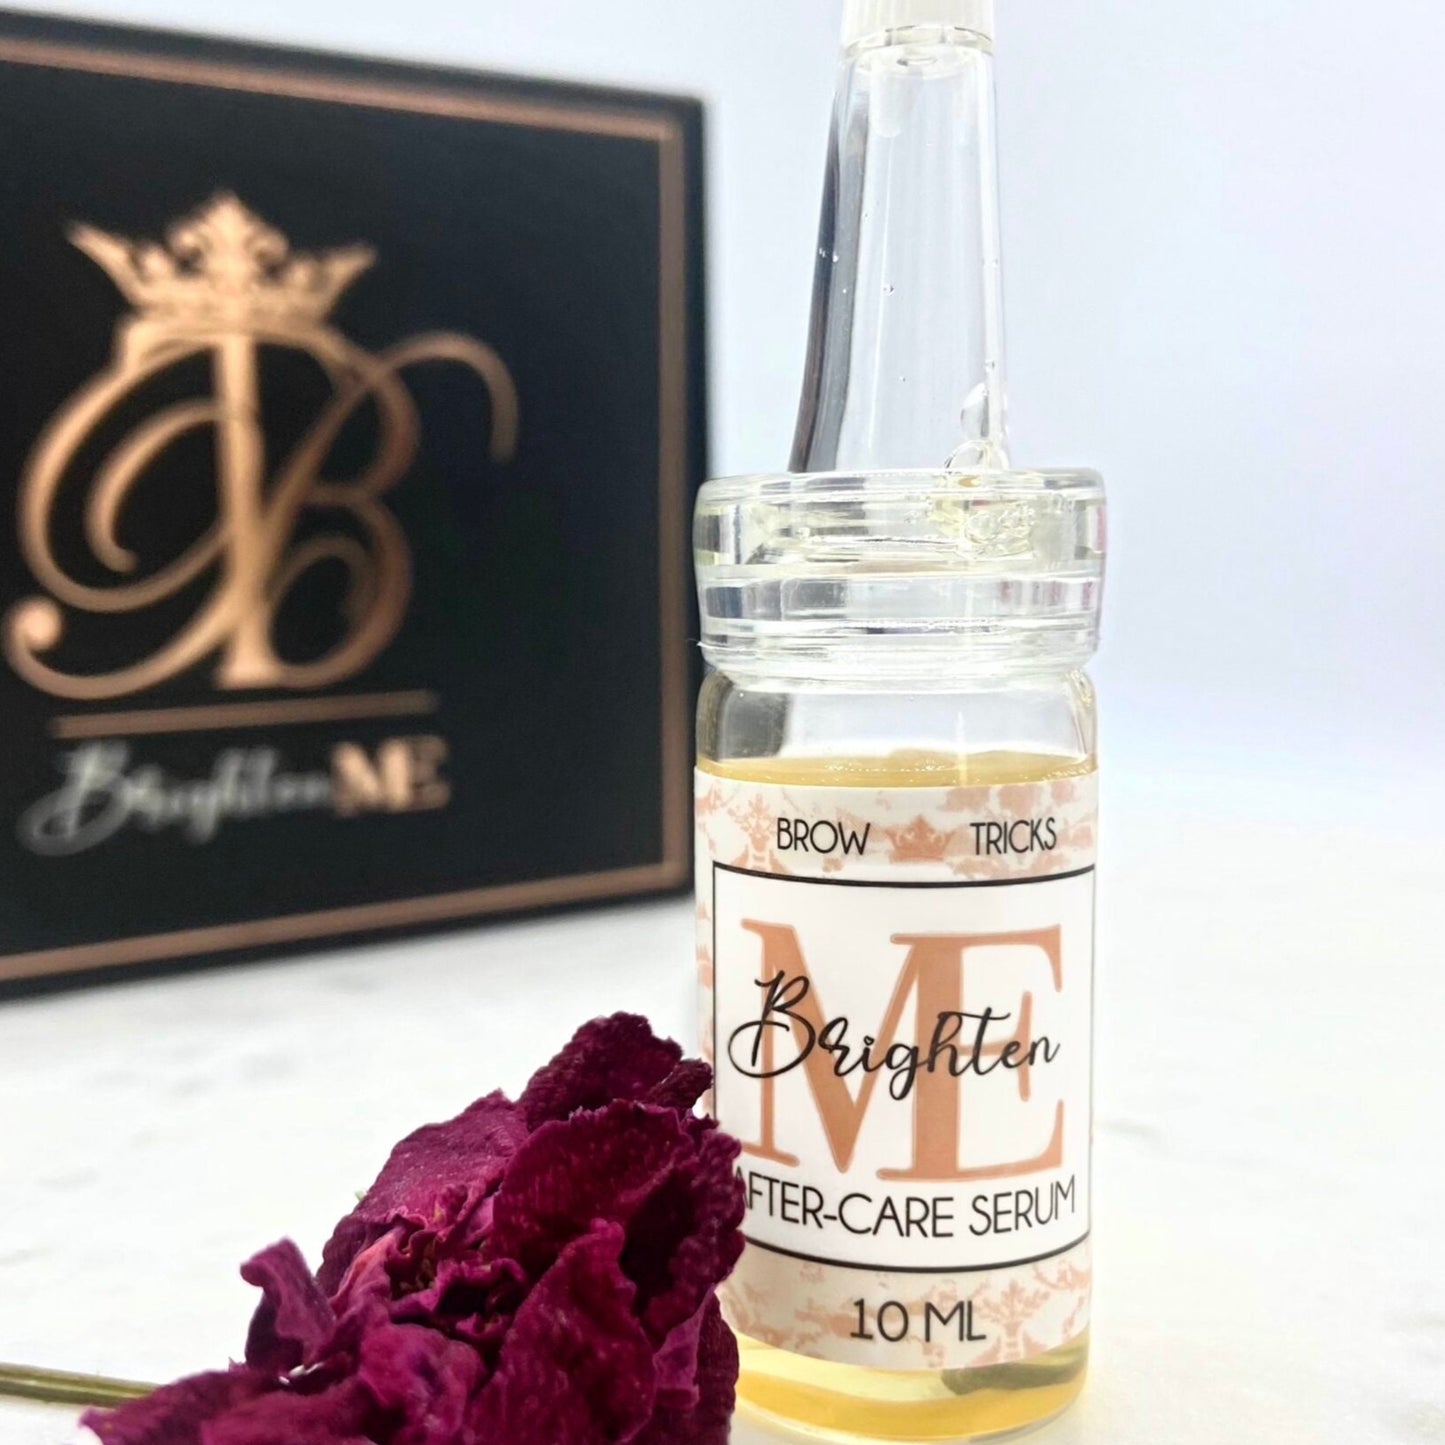 BrightenME Aftercare Serum